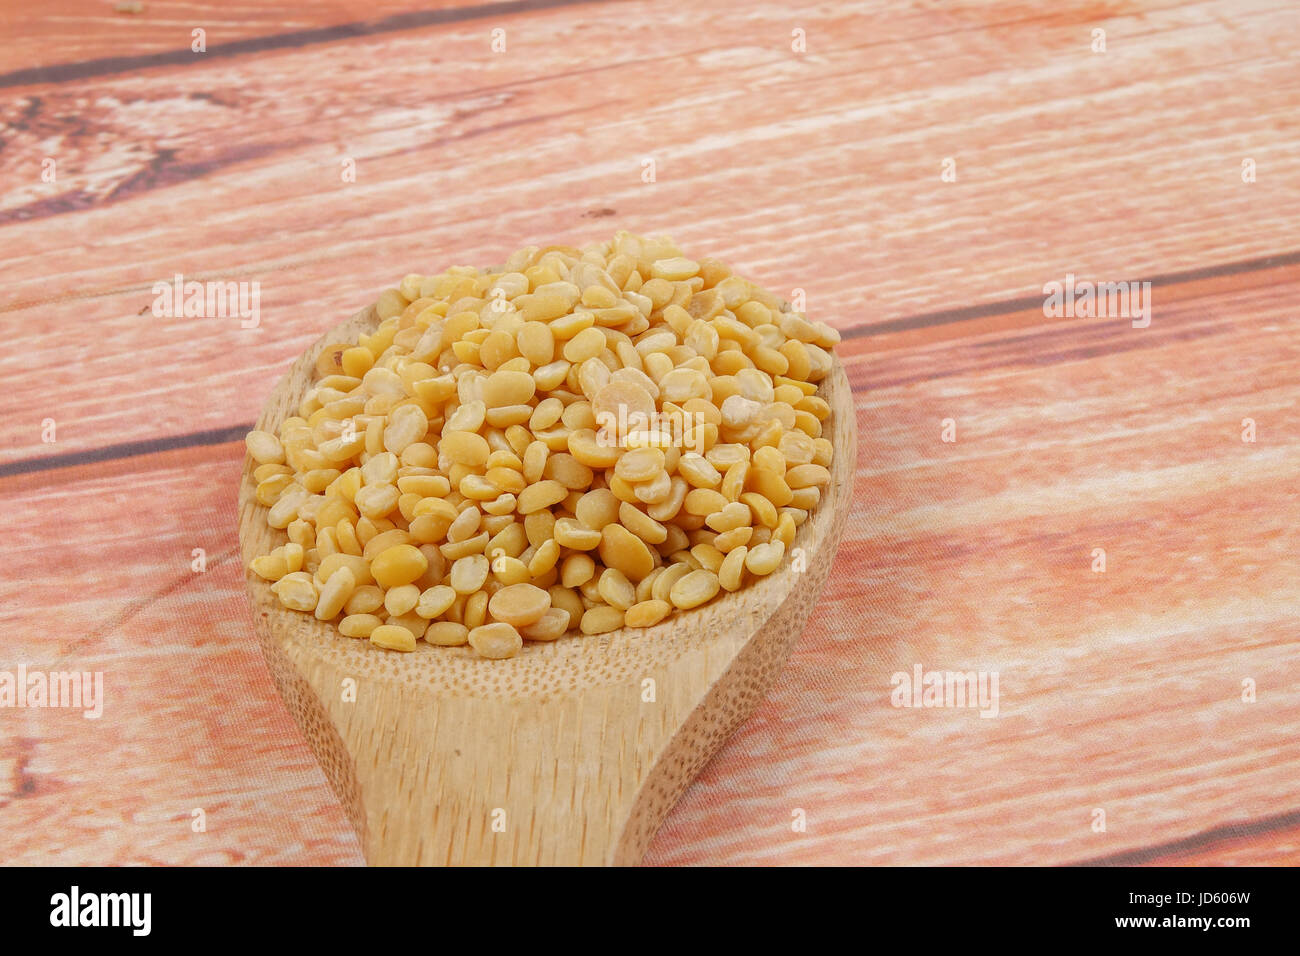 Toor dal, famous Indian legume also called yellow Pigeon peas Stock Photo